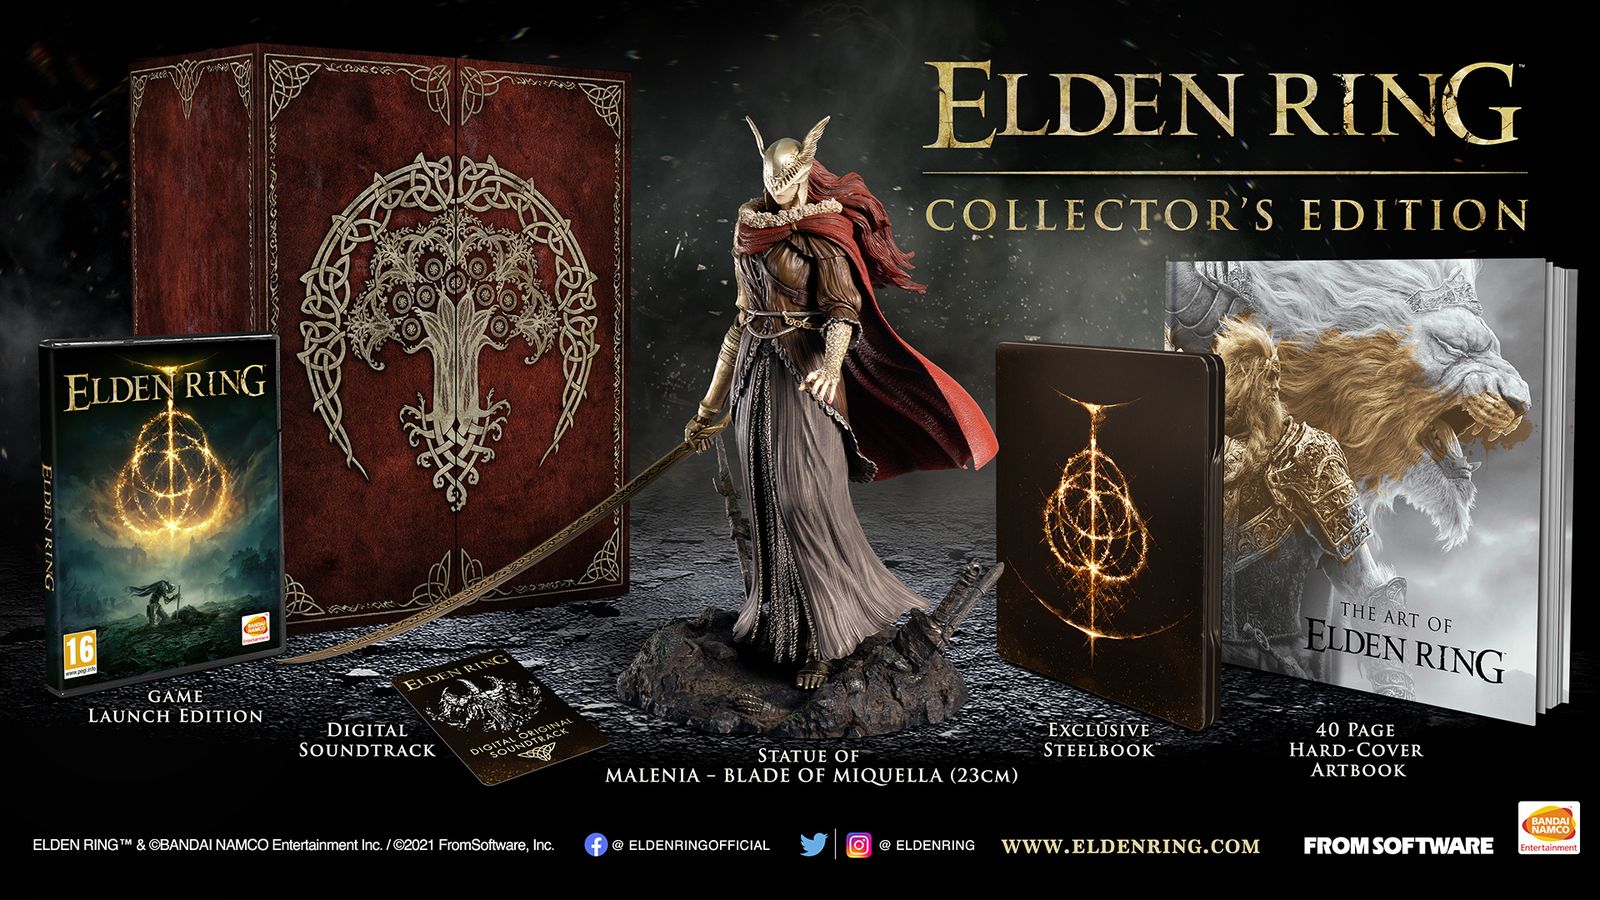 Elden Ring Pre-Order Guide: Editions and Bonuses